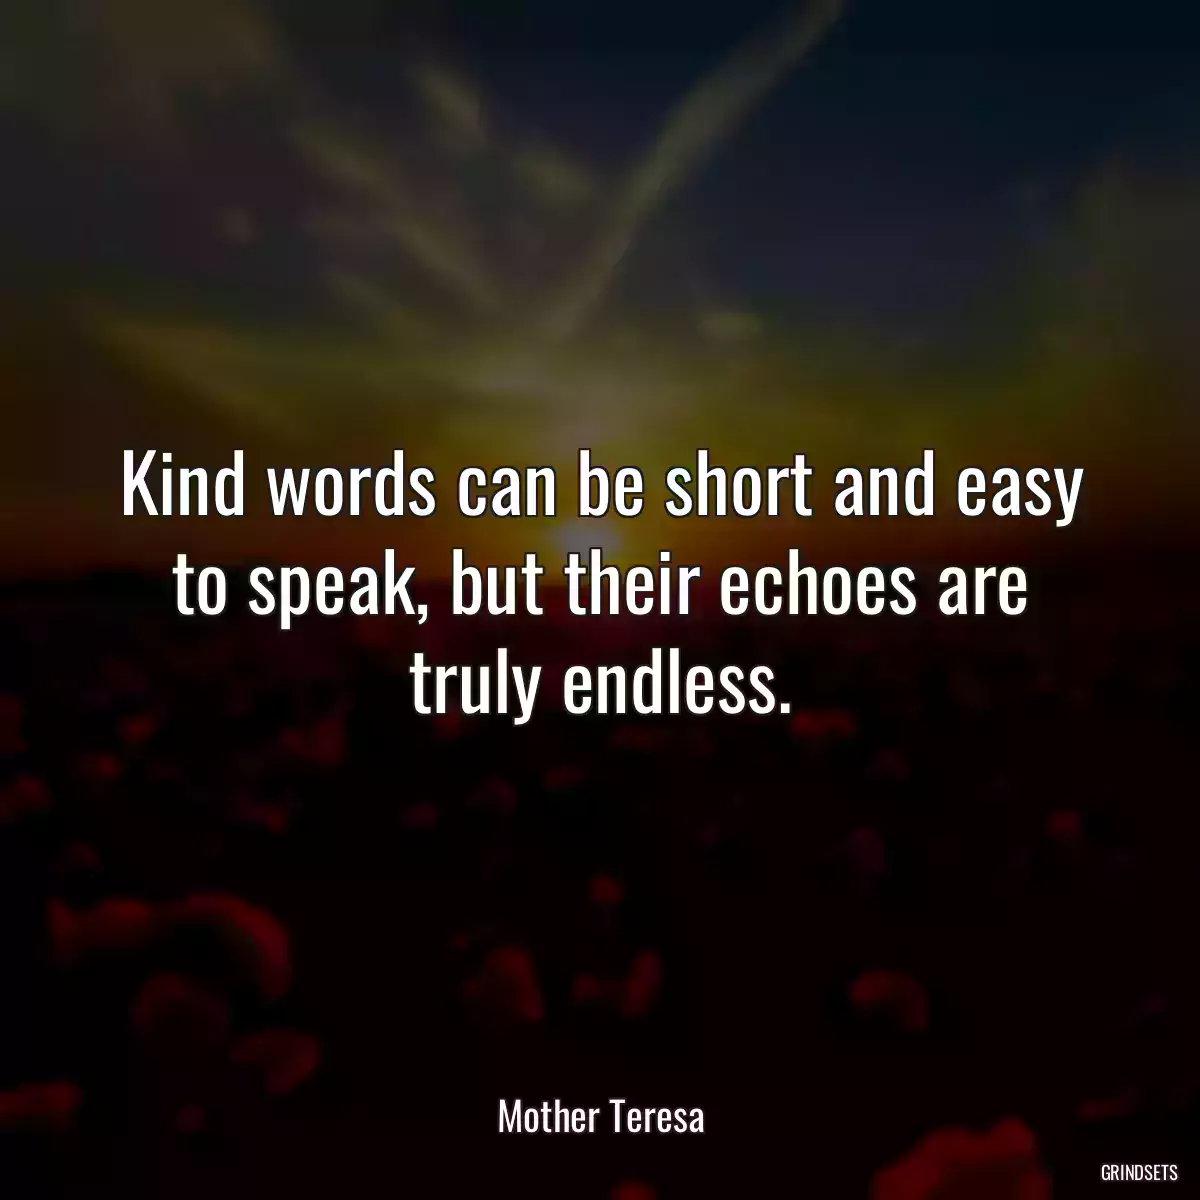 Kind words can be short and easy to speak, but their echoes are truly endless.